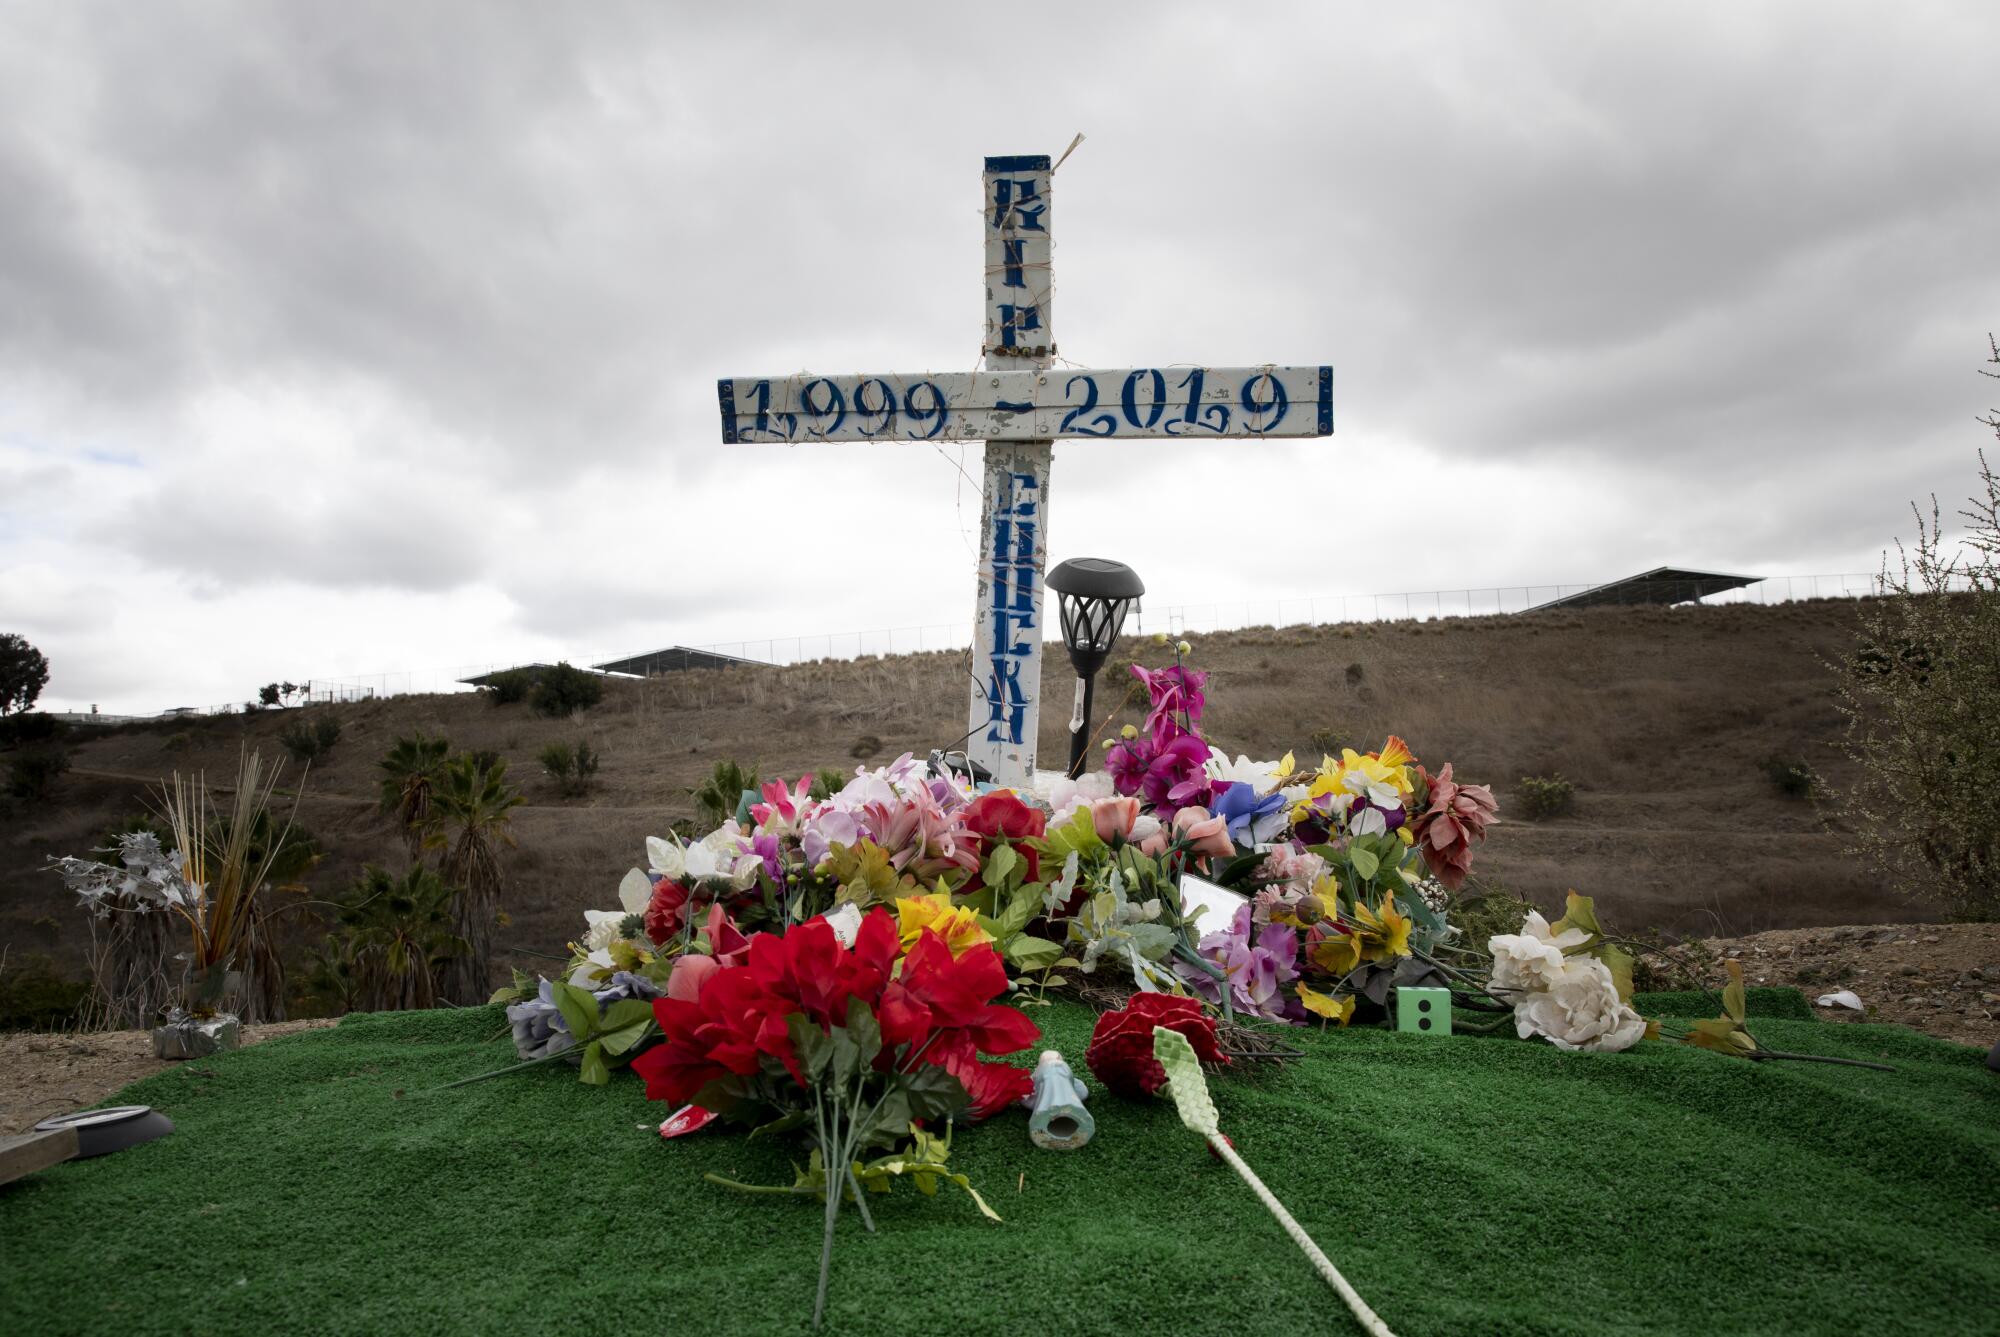 A memorial for a man who was killed on Paradise Valley Road in 2019 on Monday, Oct. 25, 2021.